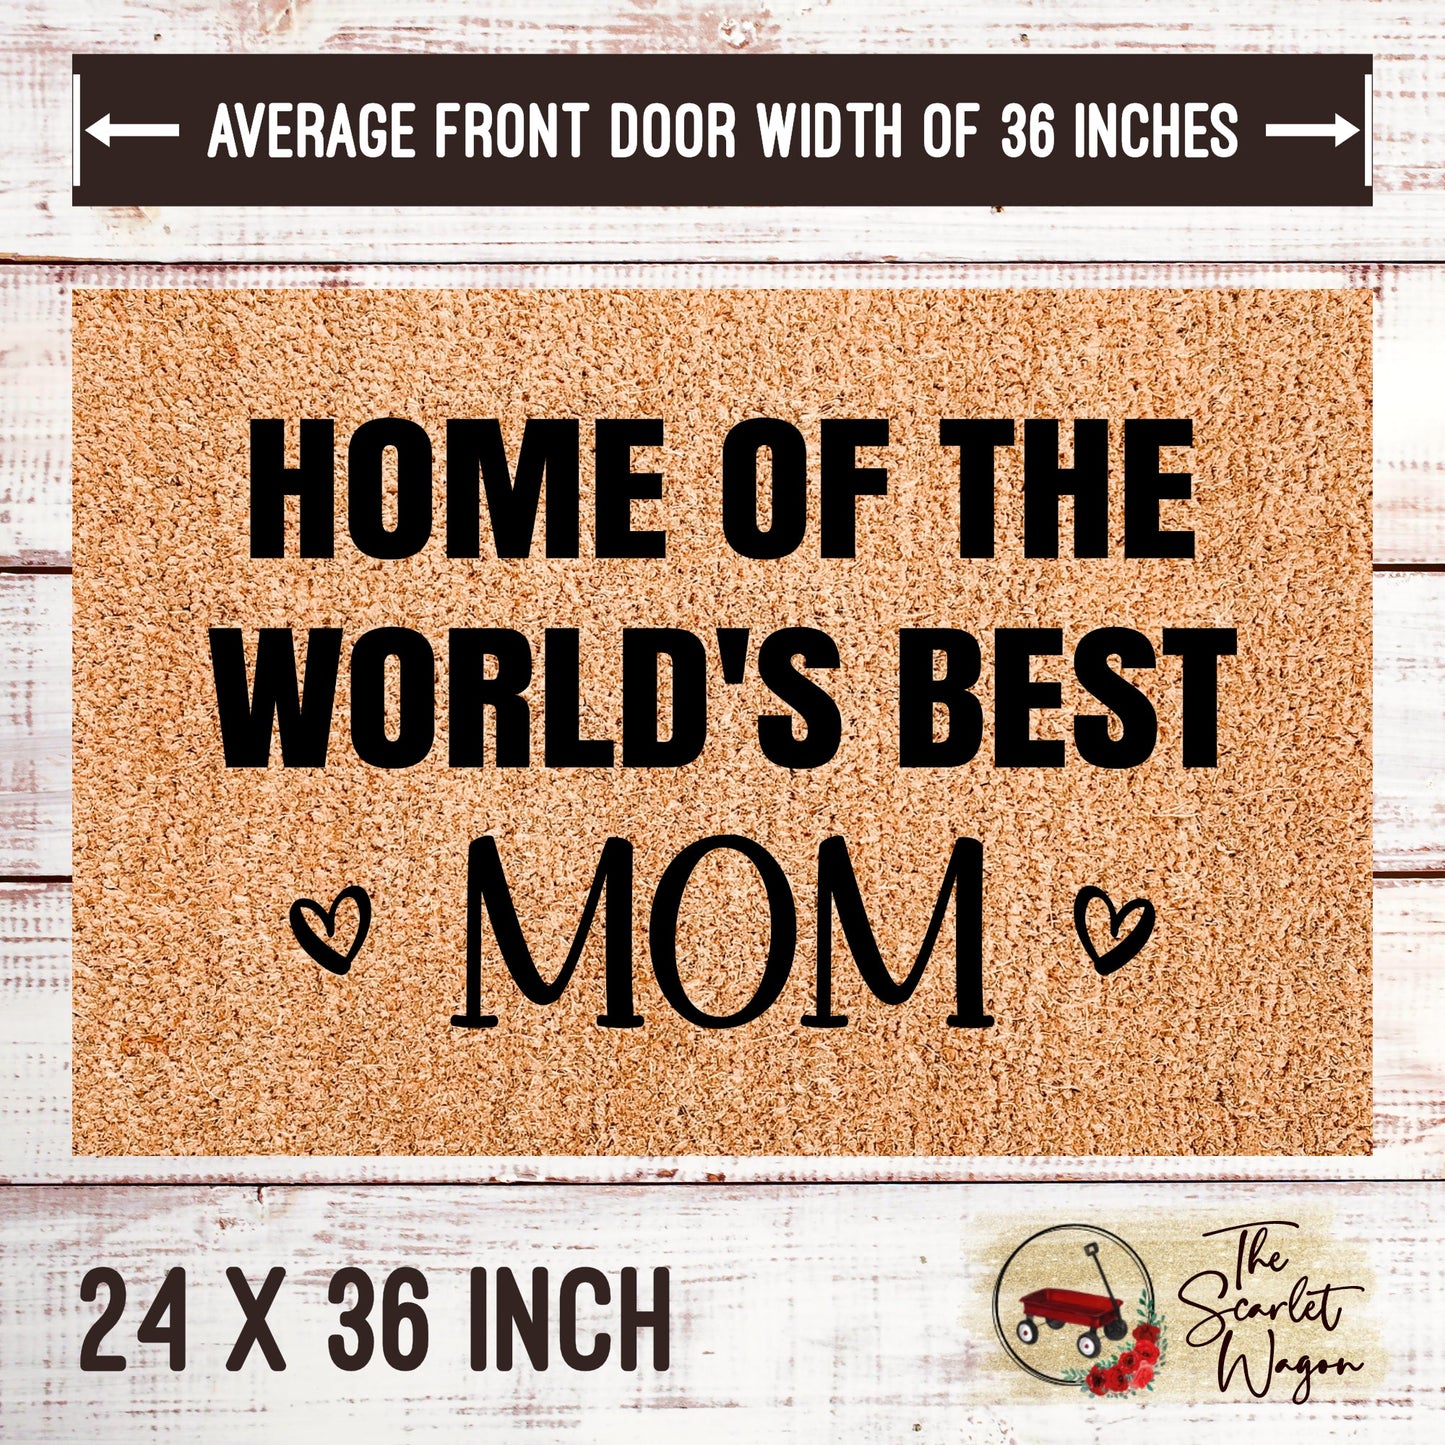 Home of the World's Best Mom Door Mats teelaunch 24x36 Inches (Free Shipping) 